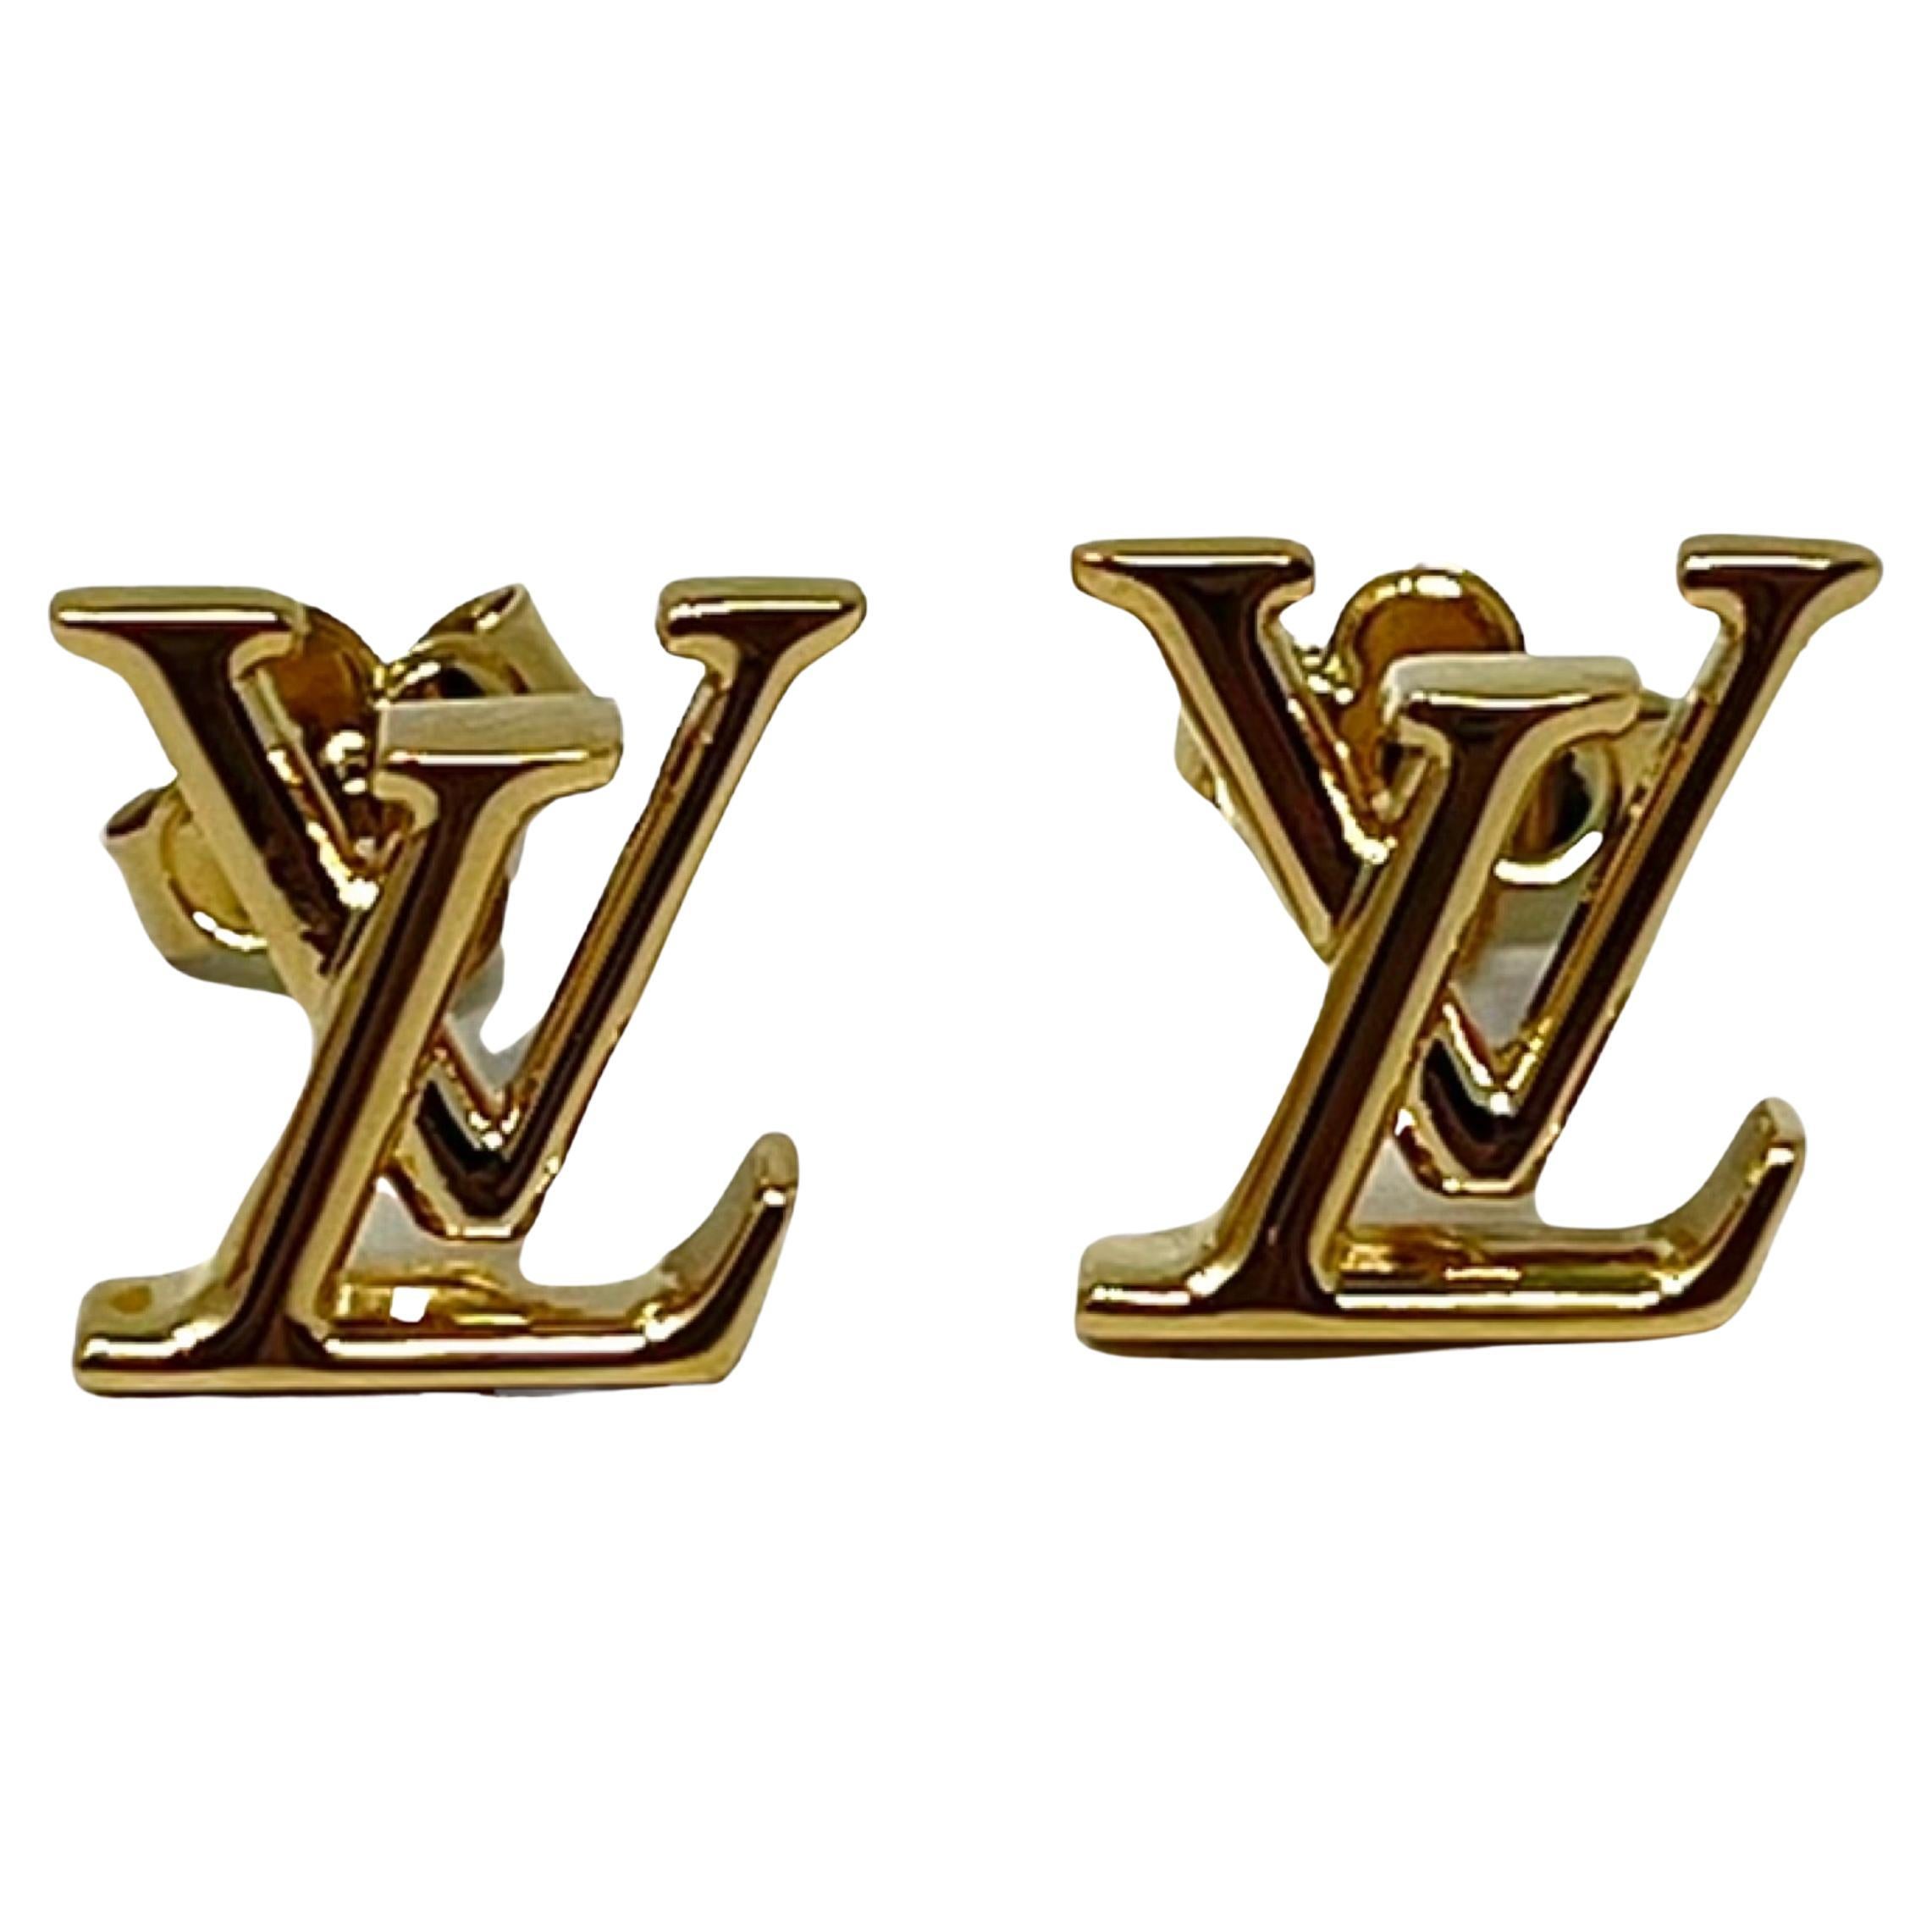 Louis Vuitton LV Iconic Pearls Earrings